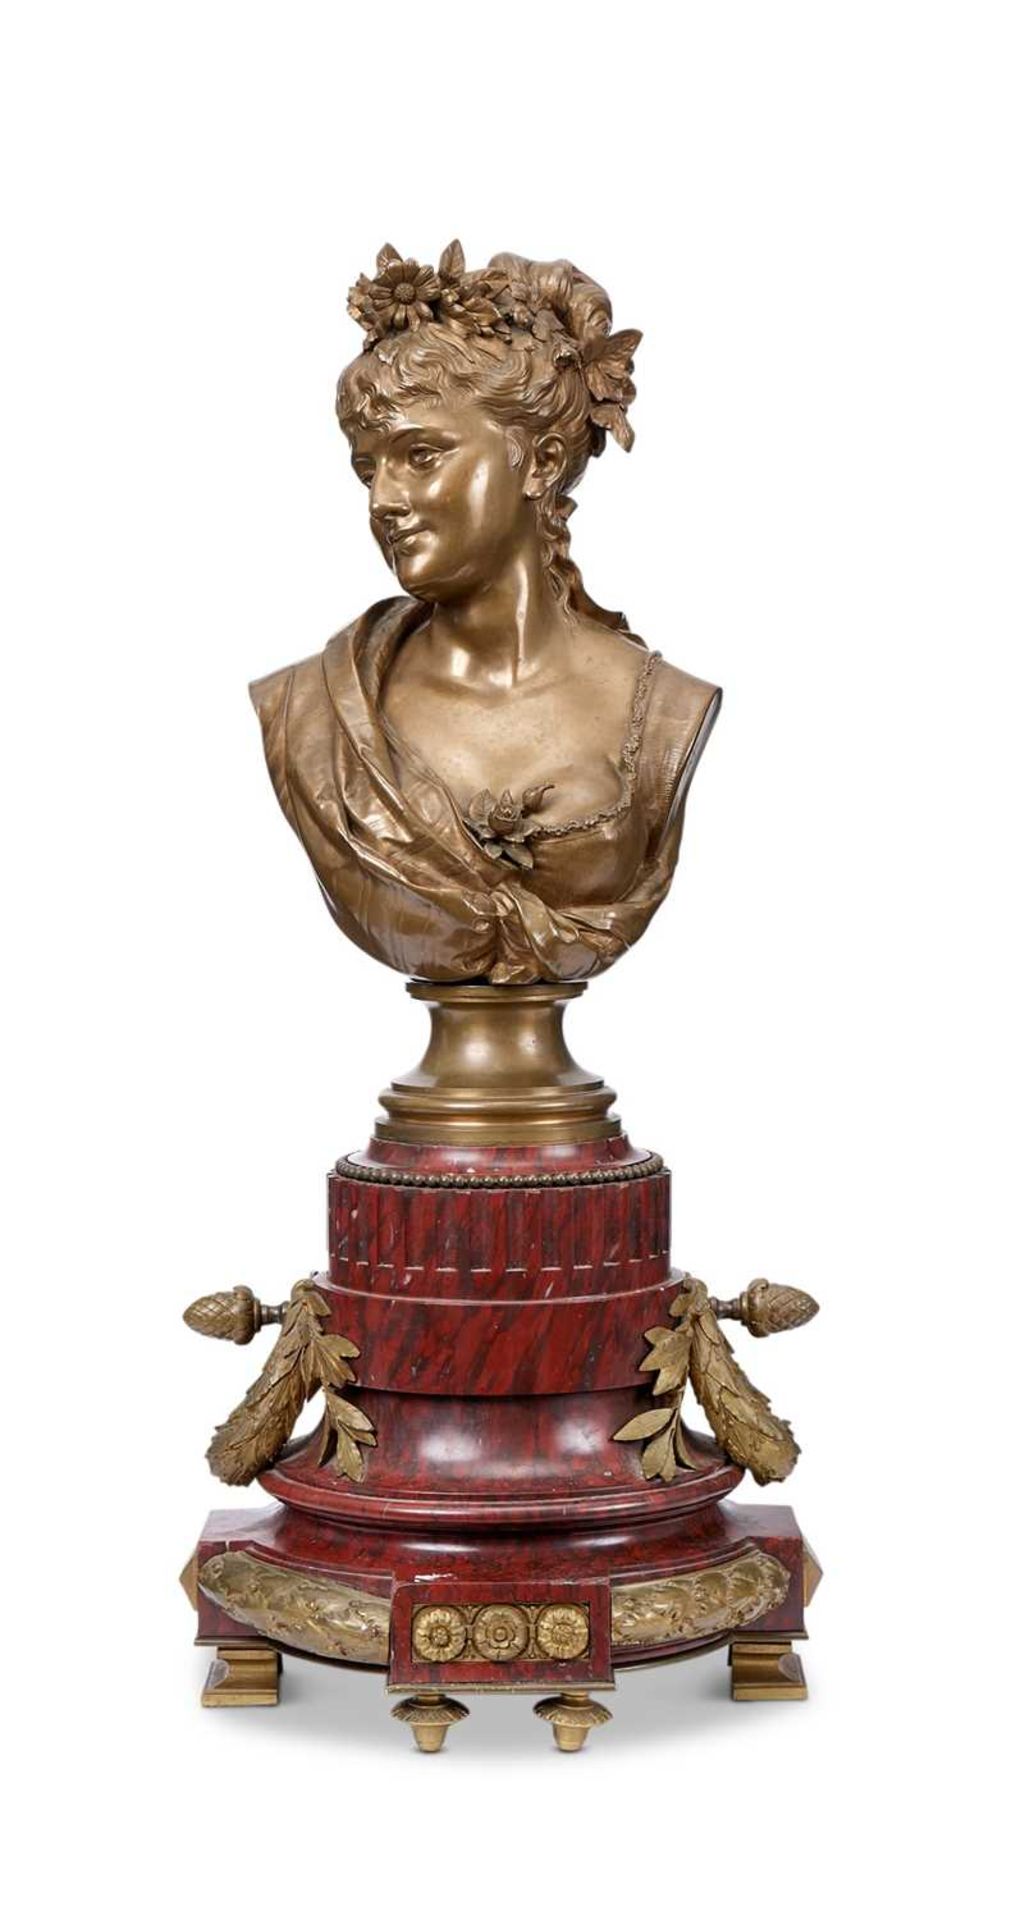 LEOPOLD HARZE (BELGIAN, 1831-1893): A LARGE BRONZE BUST OF A GIRL ON MARBLE BASE